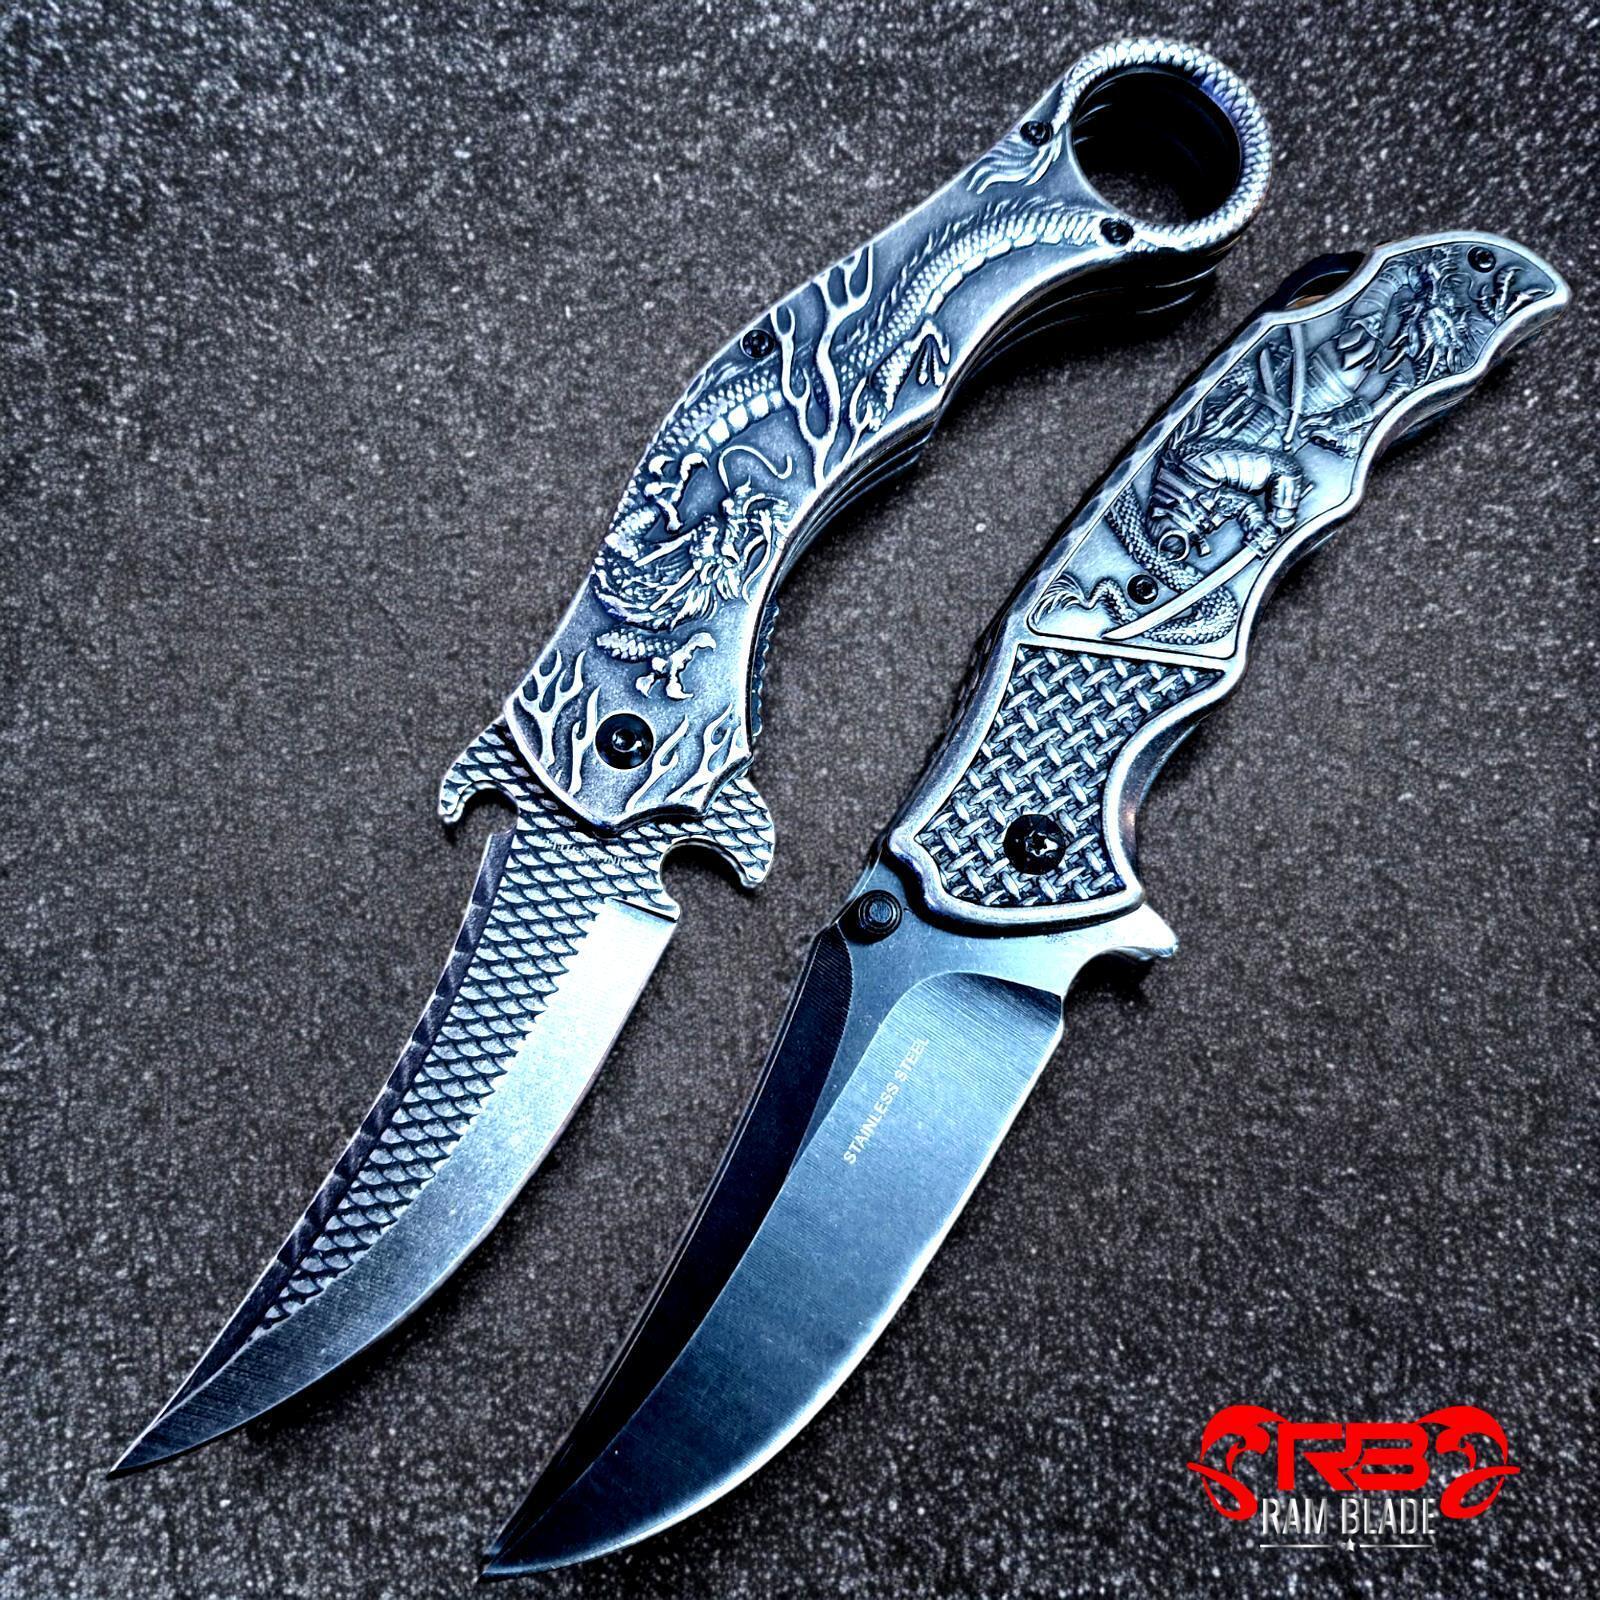 2 x STONE WASH 3D SPRING ASSISTED FOLDING TACTICAL KNIFE EDC Pocket BLADE Open